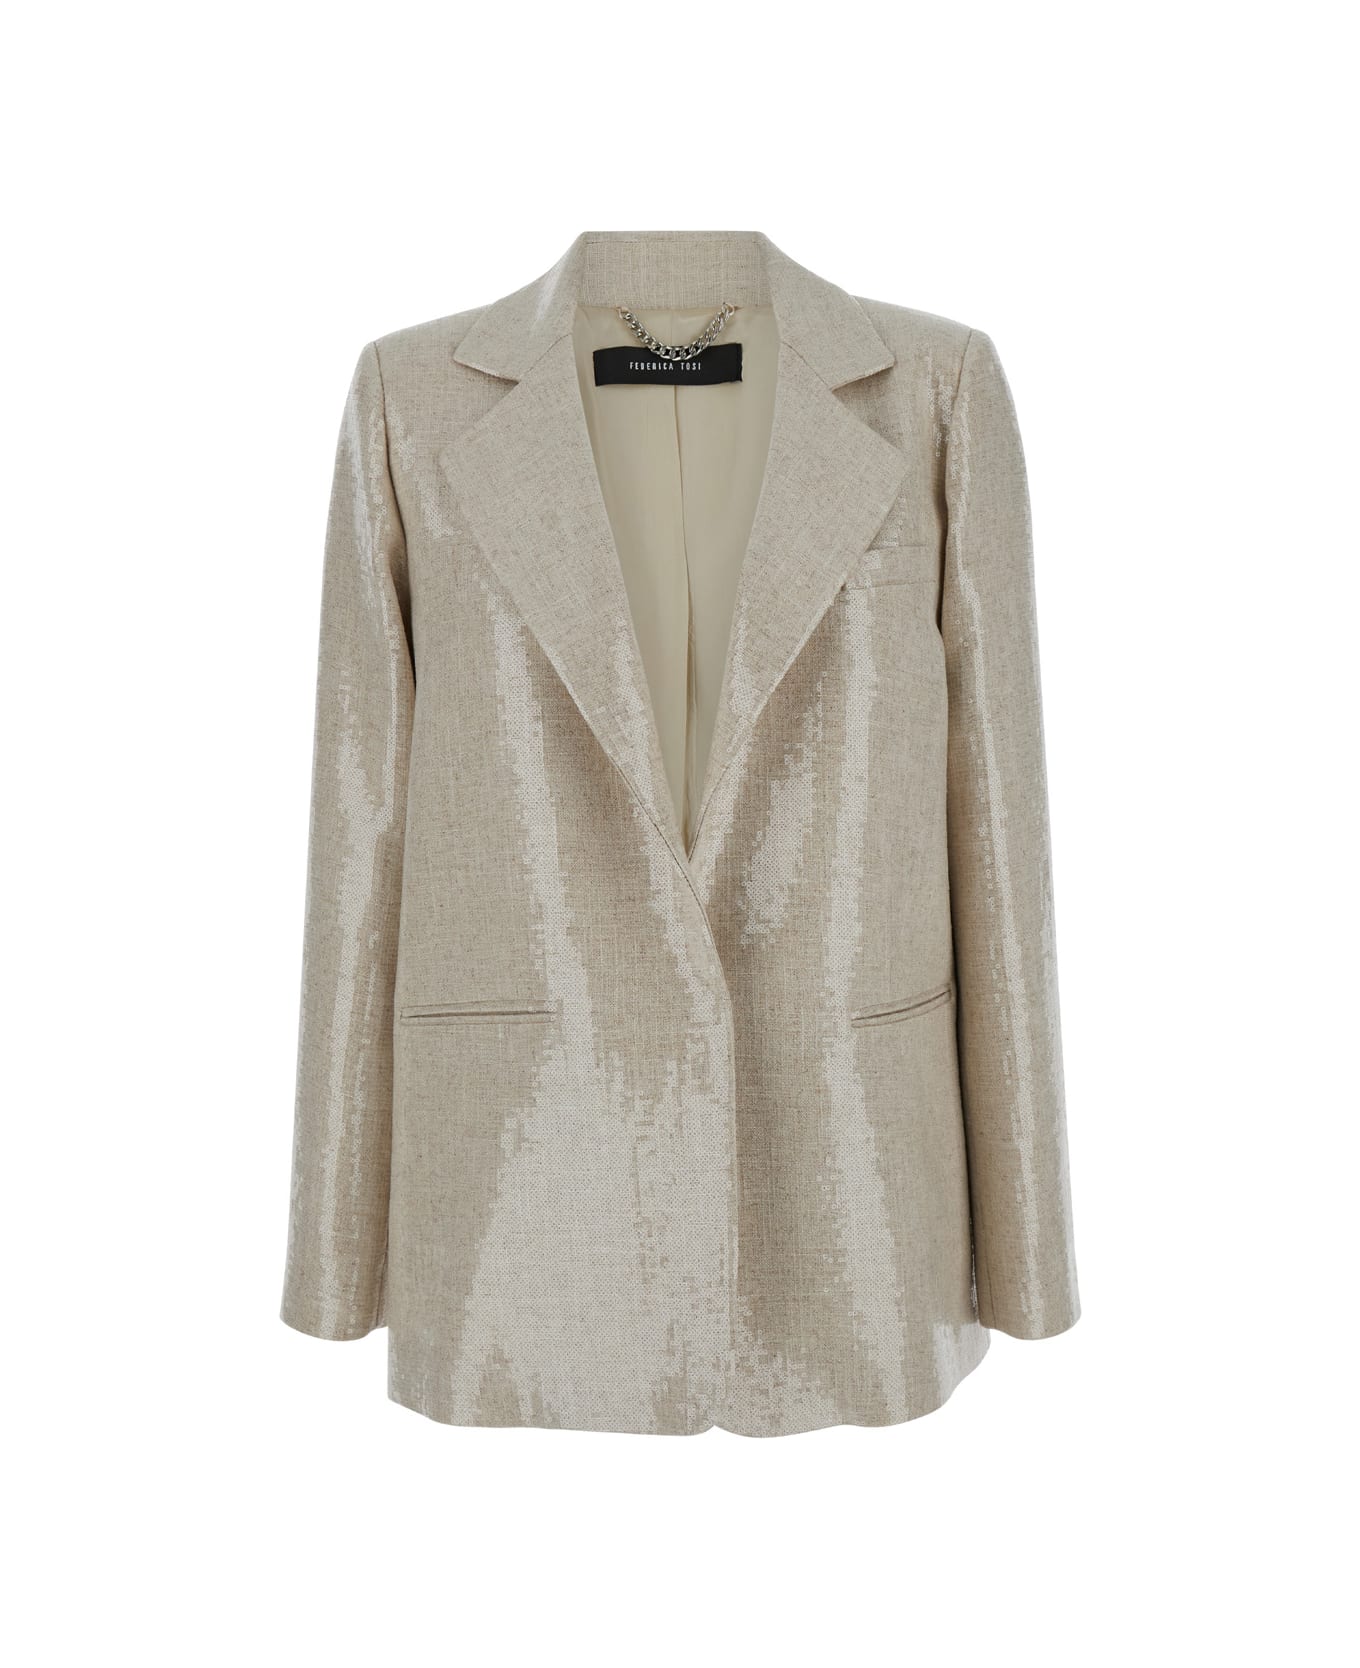 Federica Tosi Beige Blazer With Sequins In Cotton Blend Woman - Beige ブレザー